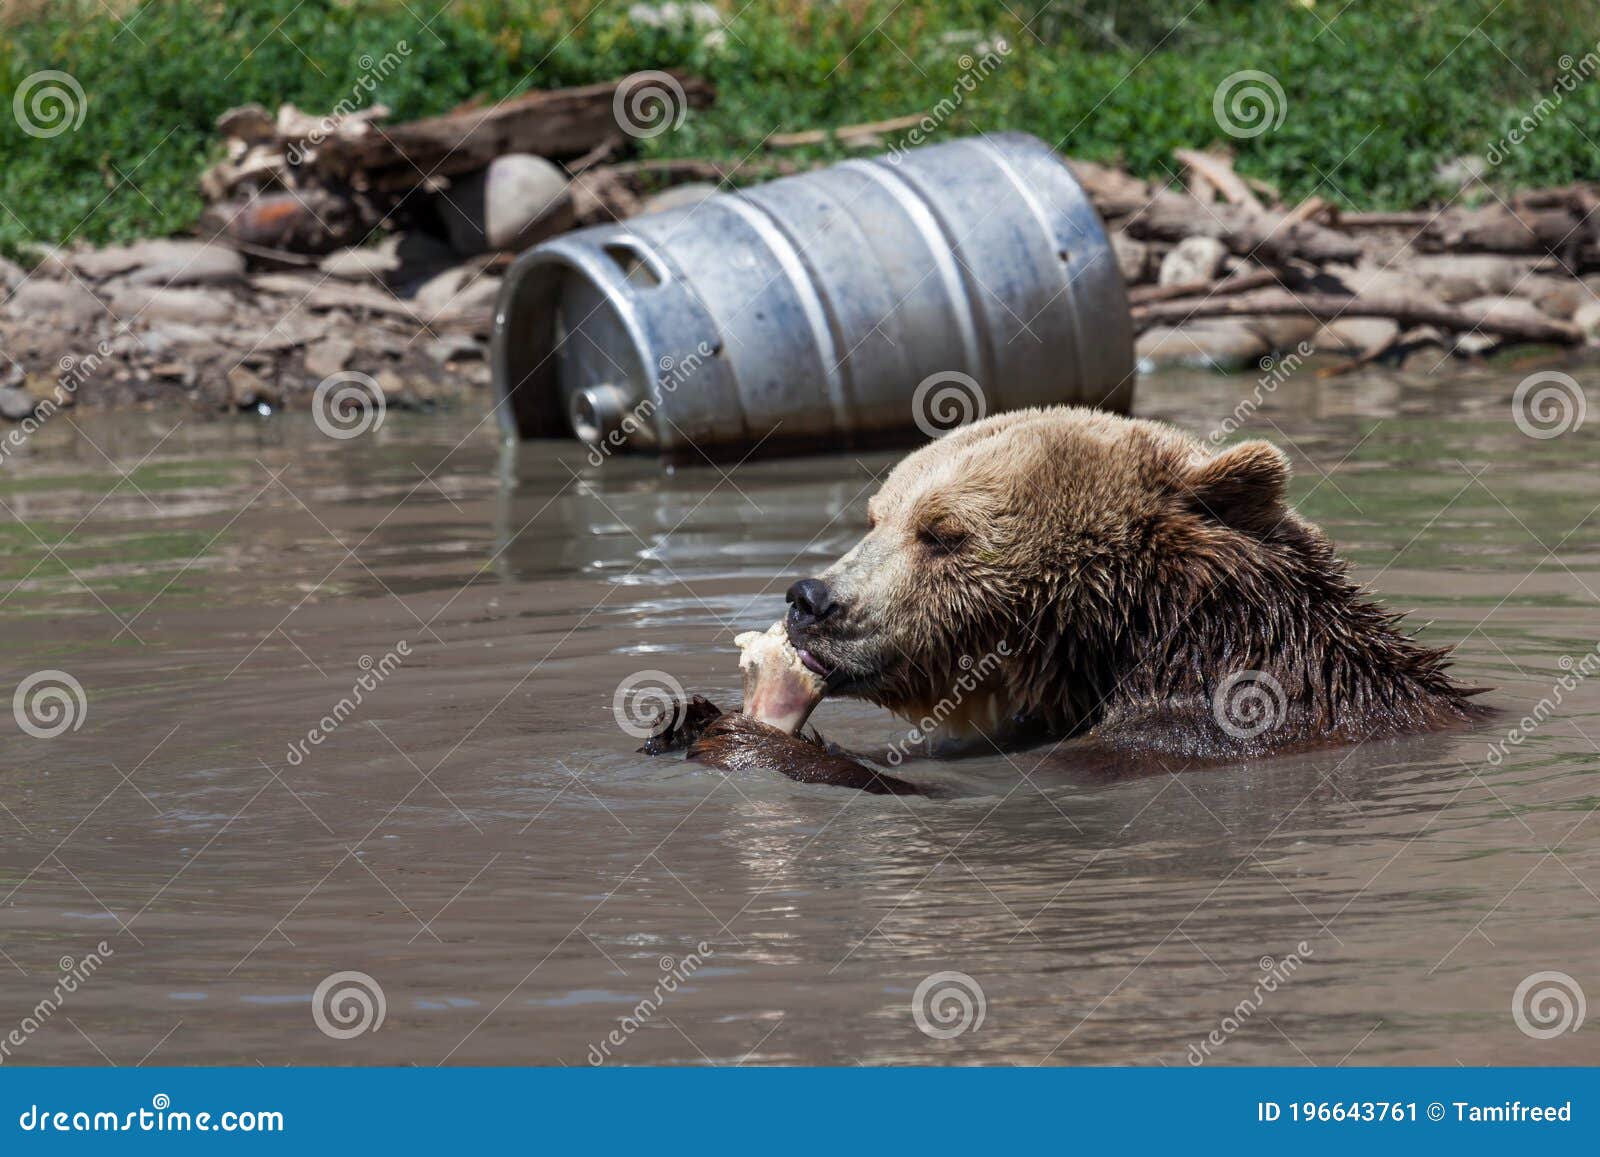 Grizzly Bear Eating in a Pond Stock Image - Image of eating, holding:  196643761